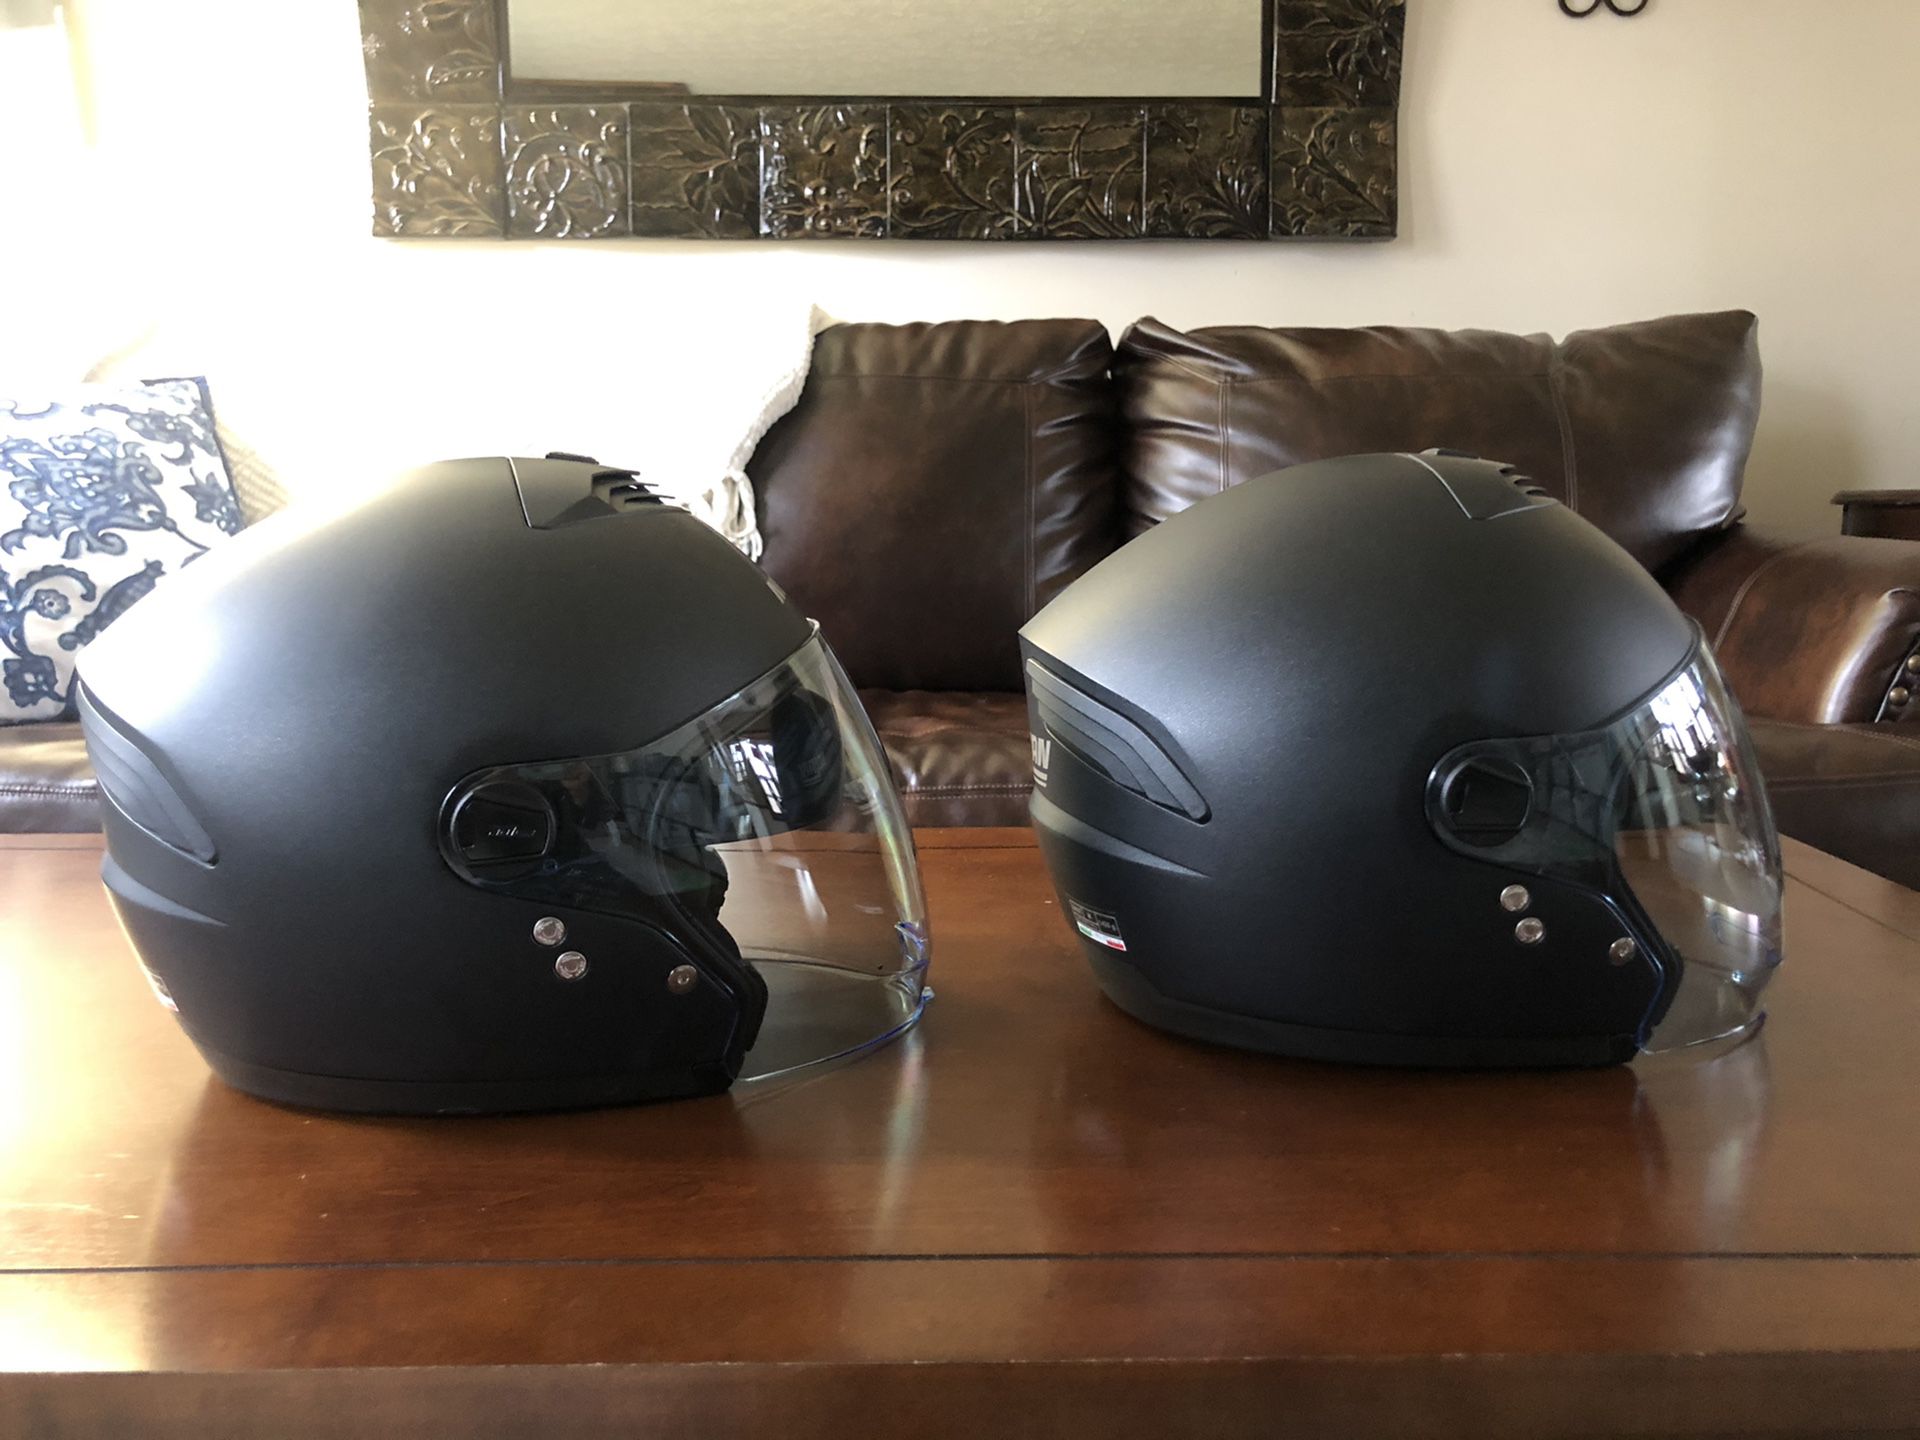 Nolan Motorcycle Helmets - Matching His and Hers